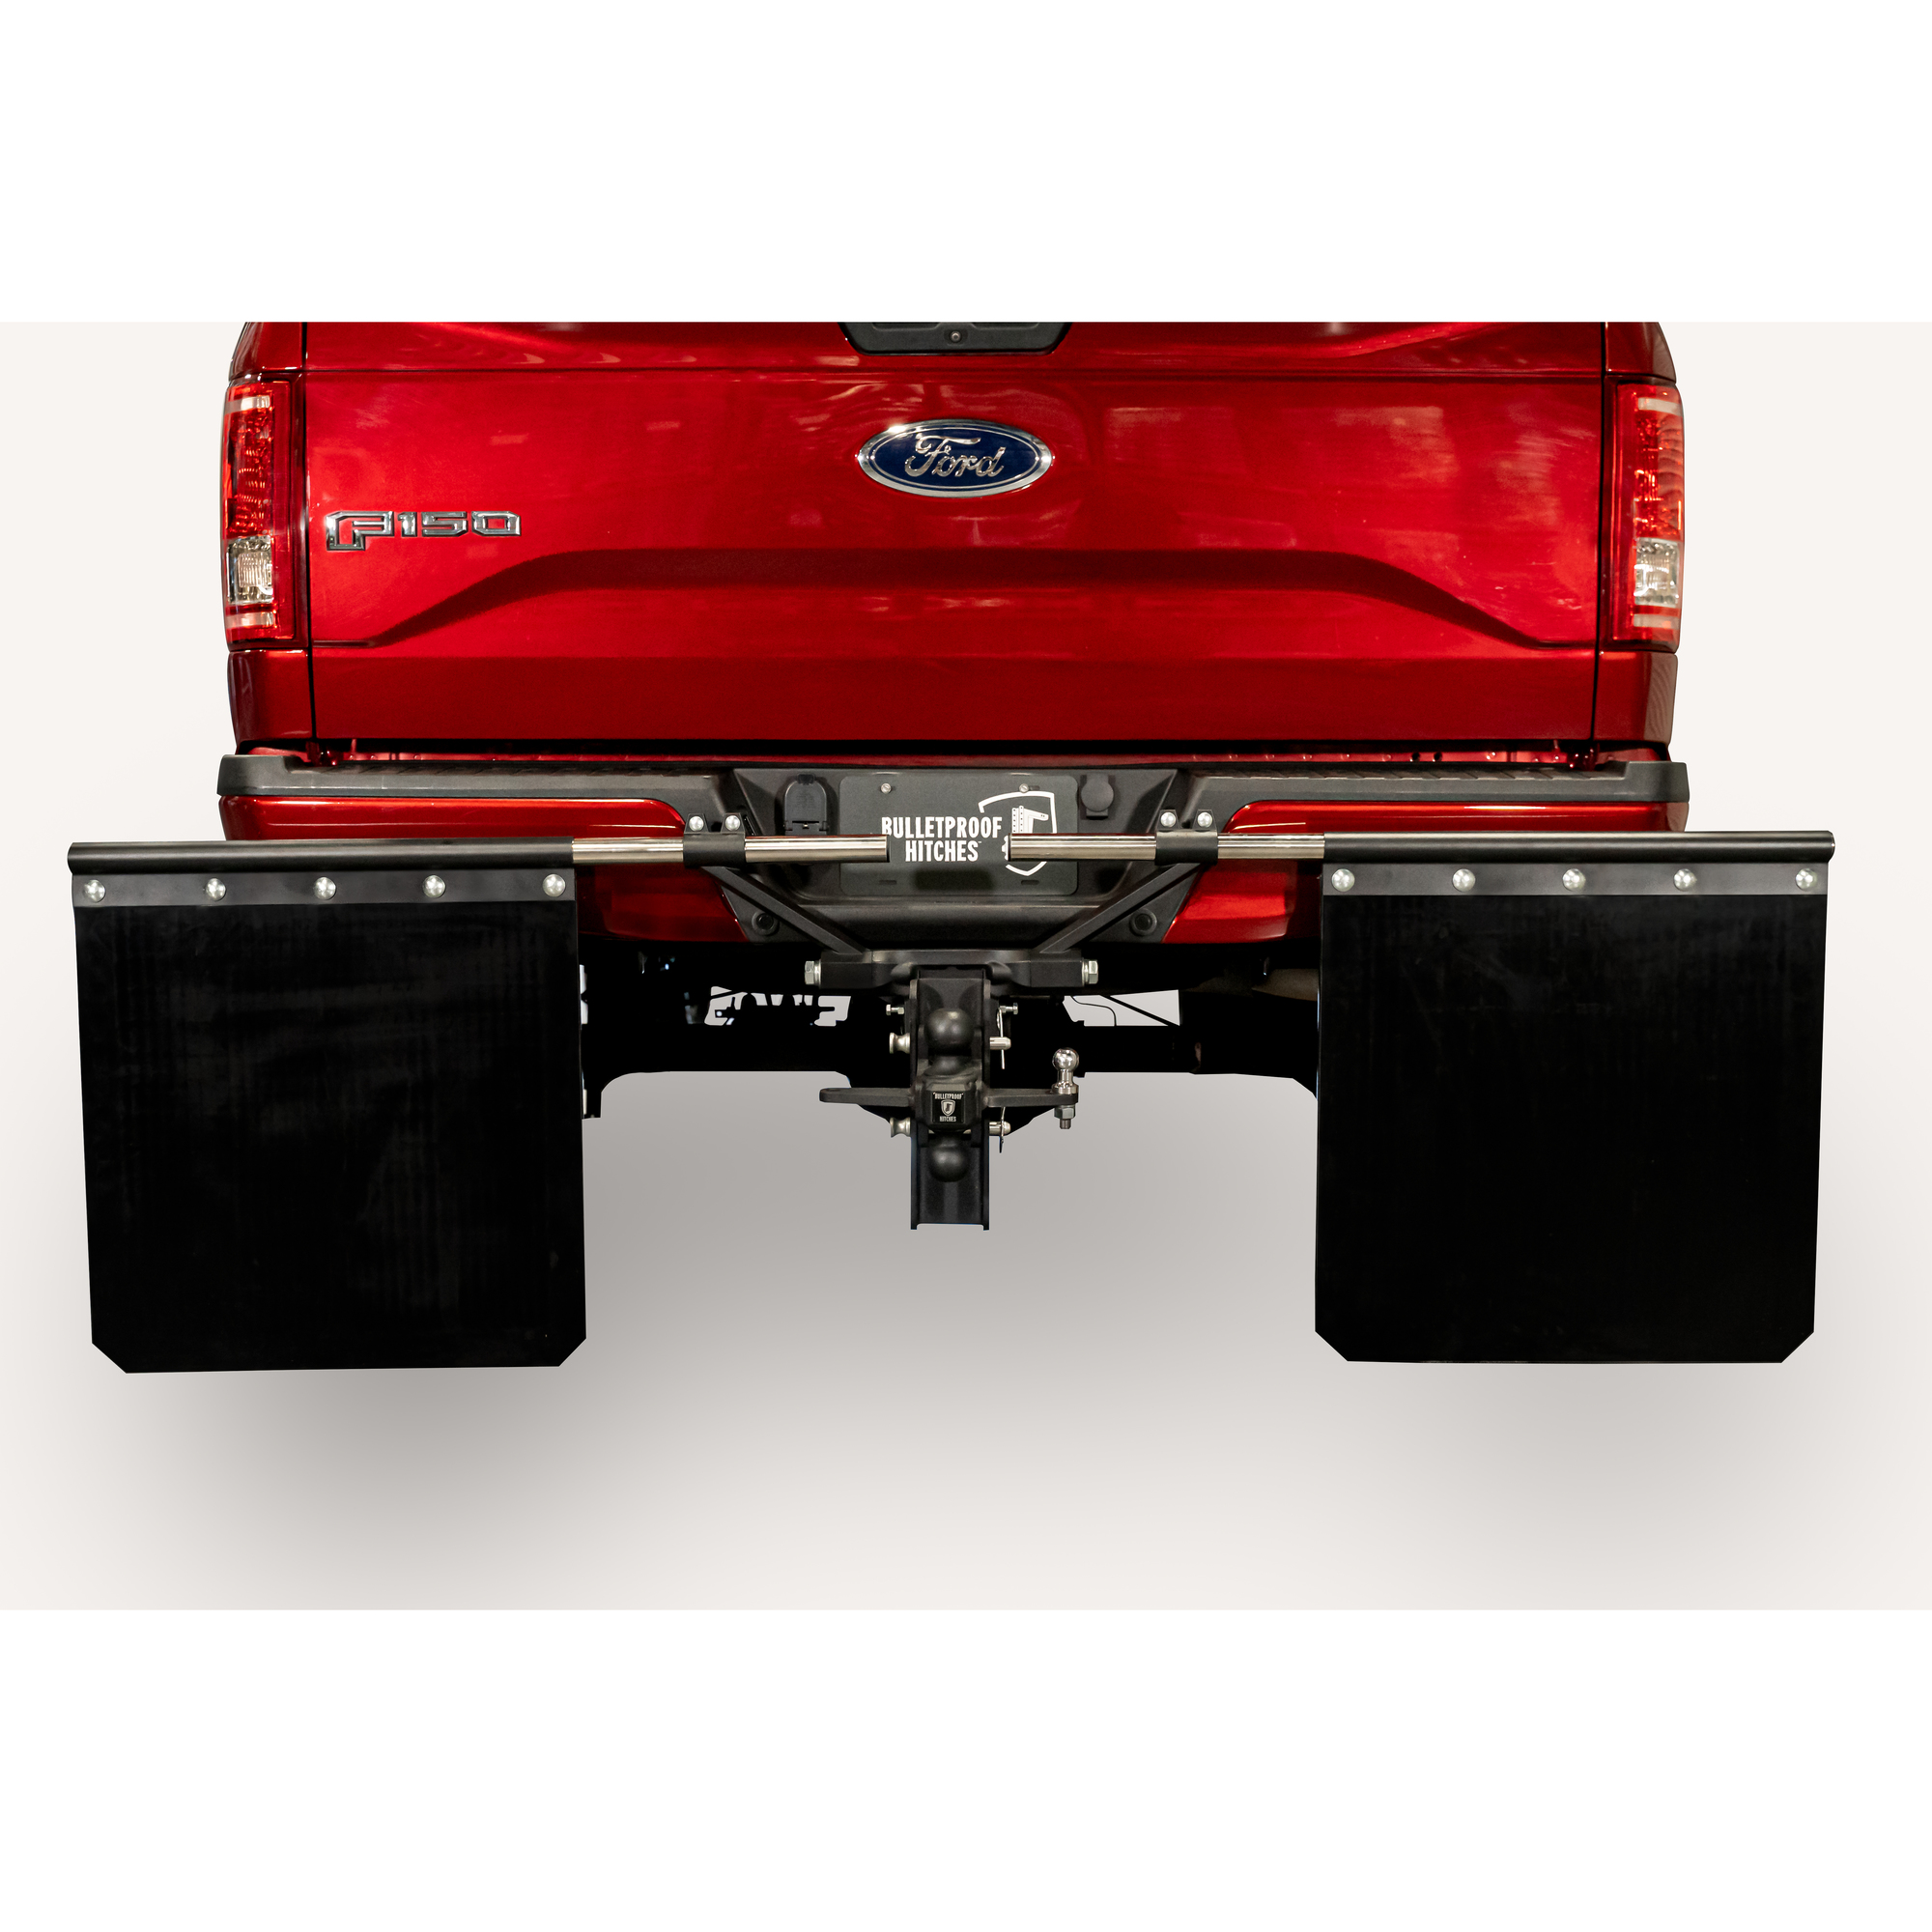 BulletProof Hitches, ROAD SHIELD MUD FLAP SYSTEM, Fits Receiver Size Multiple in, Model BPMUDFLAP